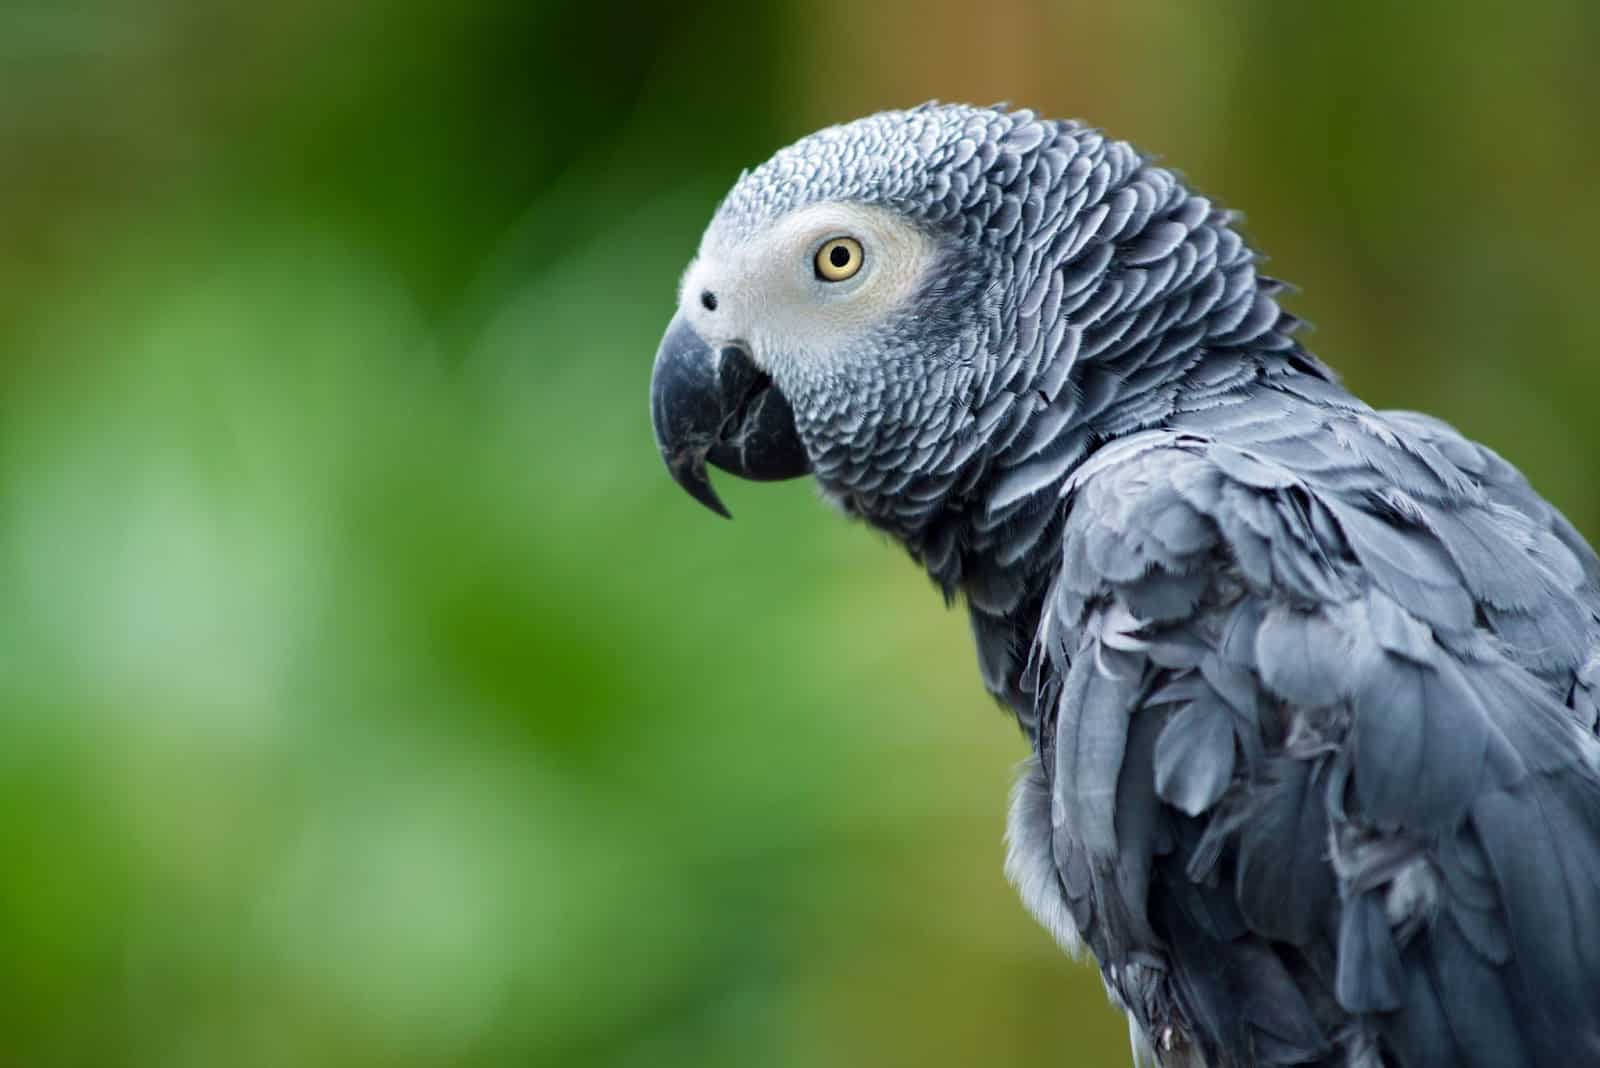 African Grey Parrots Price Guide (With Types of Greys and Maintenance Costs Too!) exclusively at Petrestart.com.